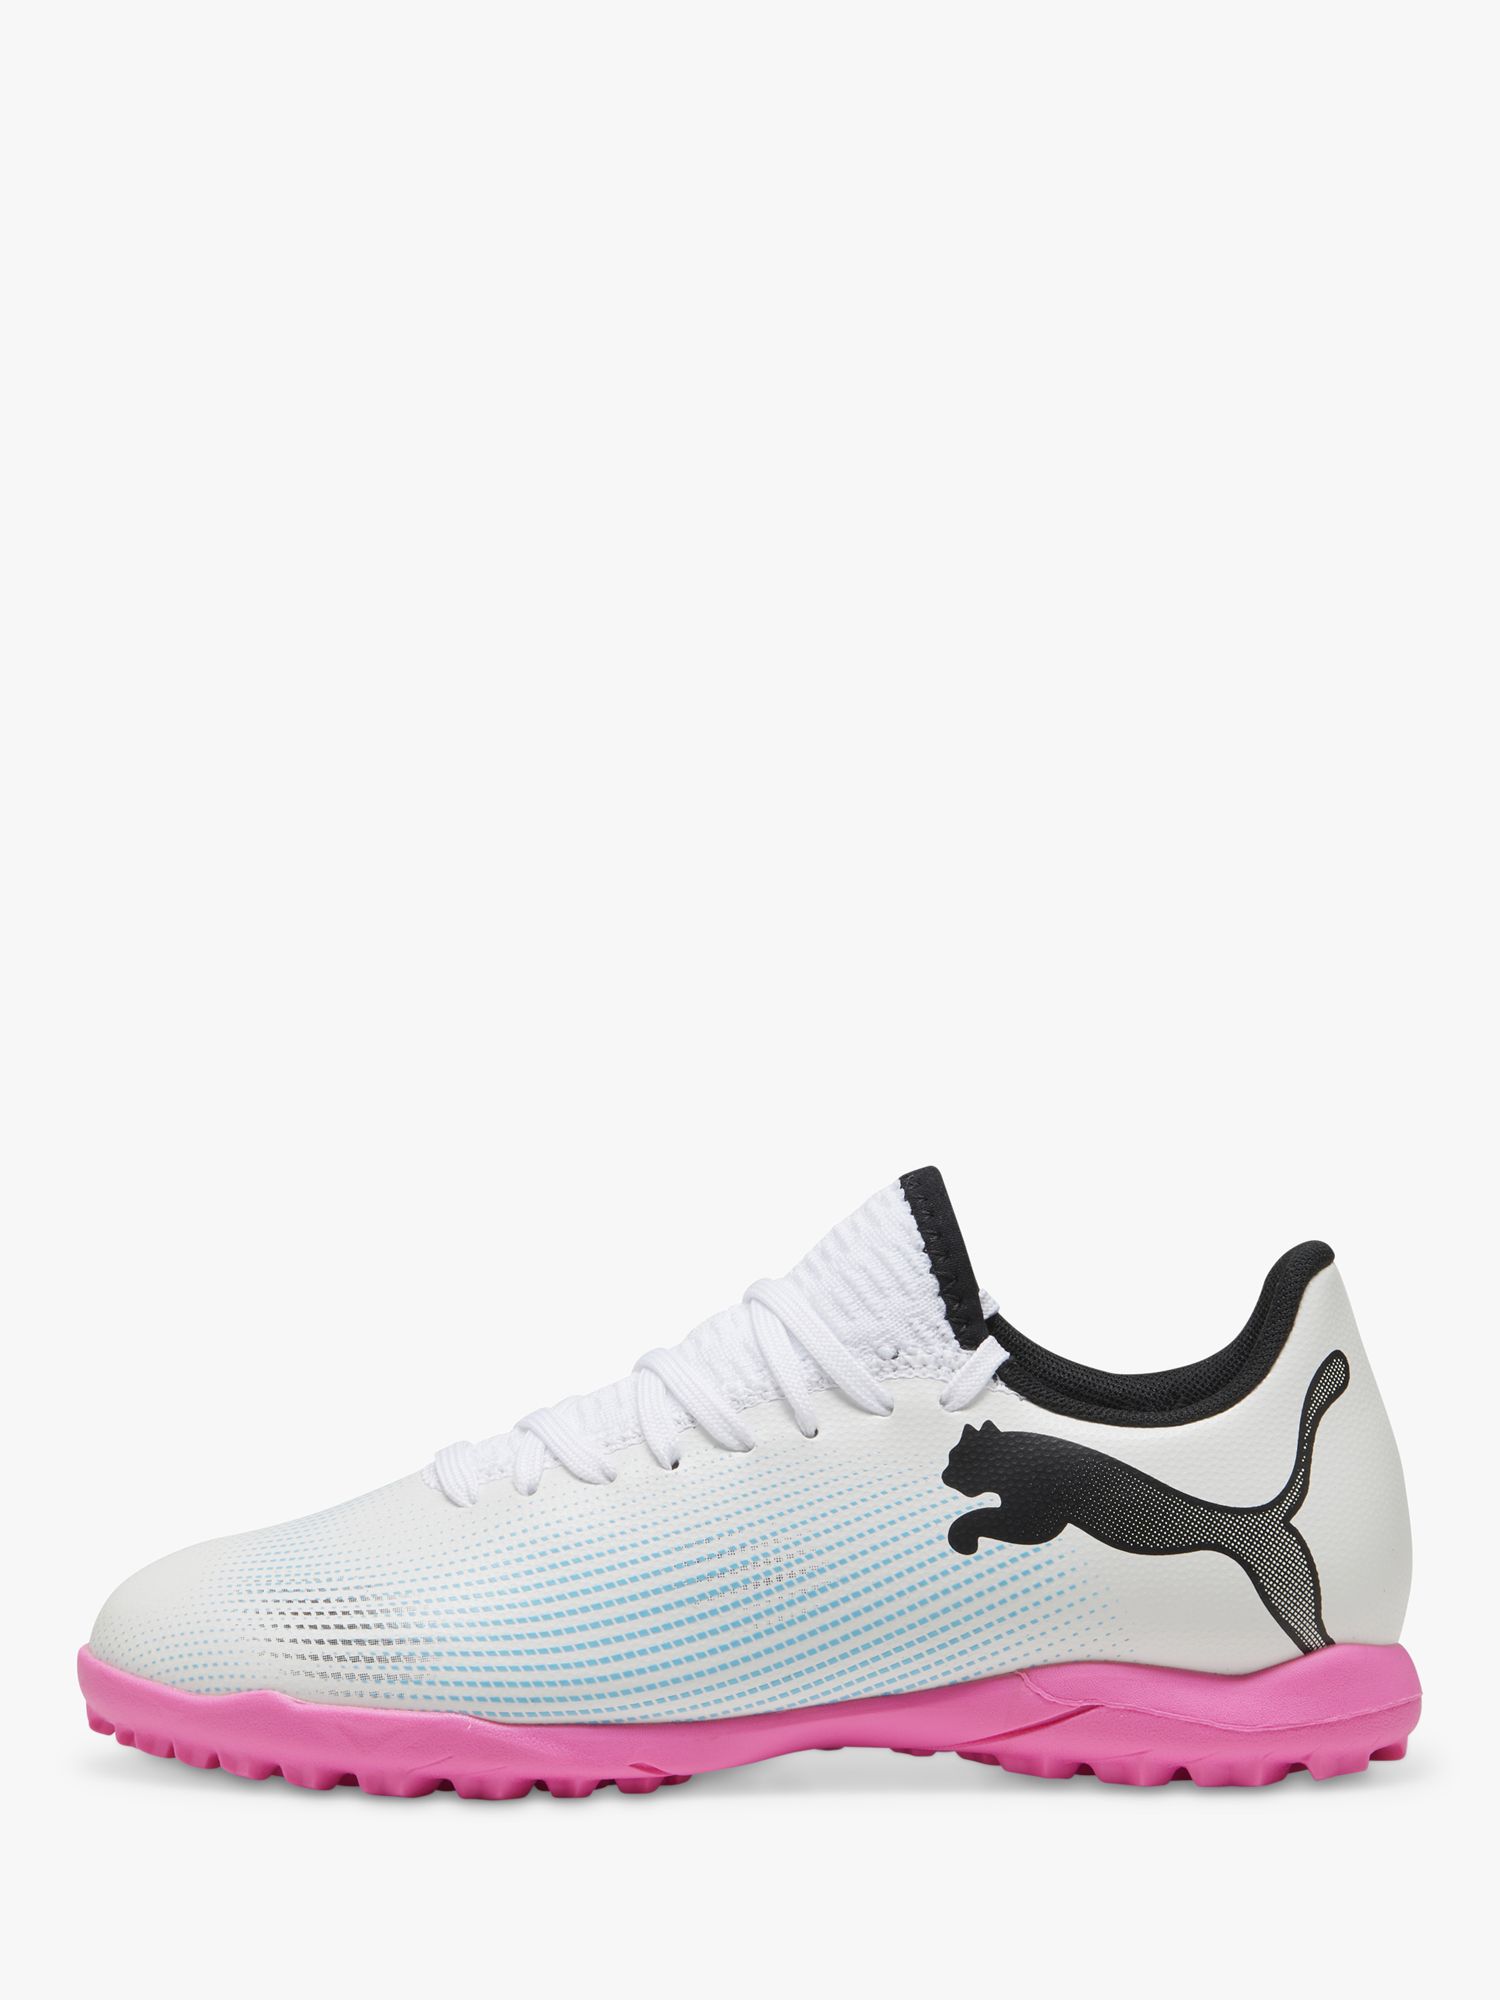 Buy PUMA Kids' Future 7 Playmakers Trainers Online at johnlewis.com